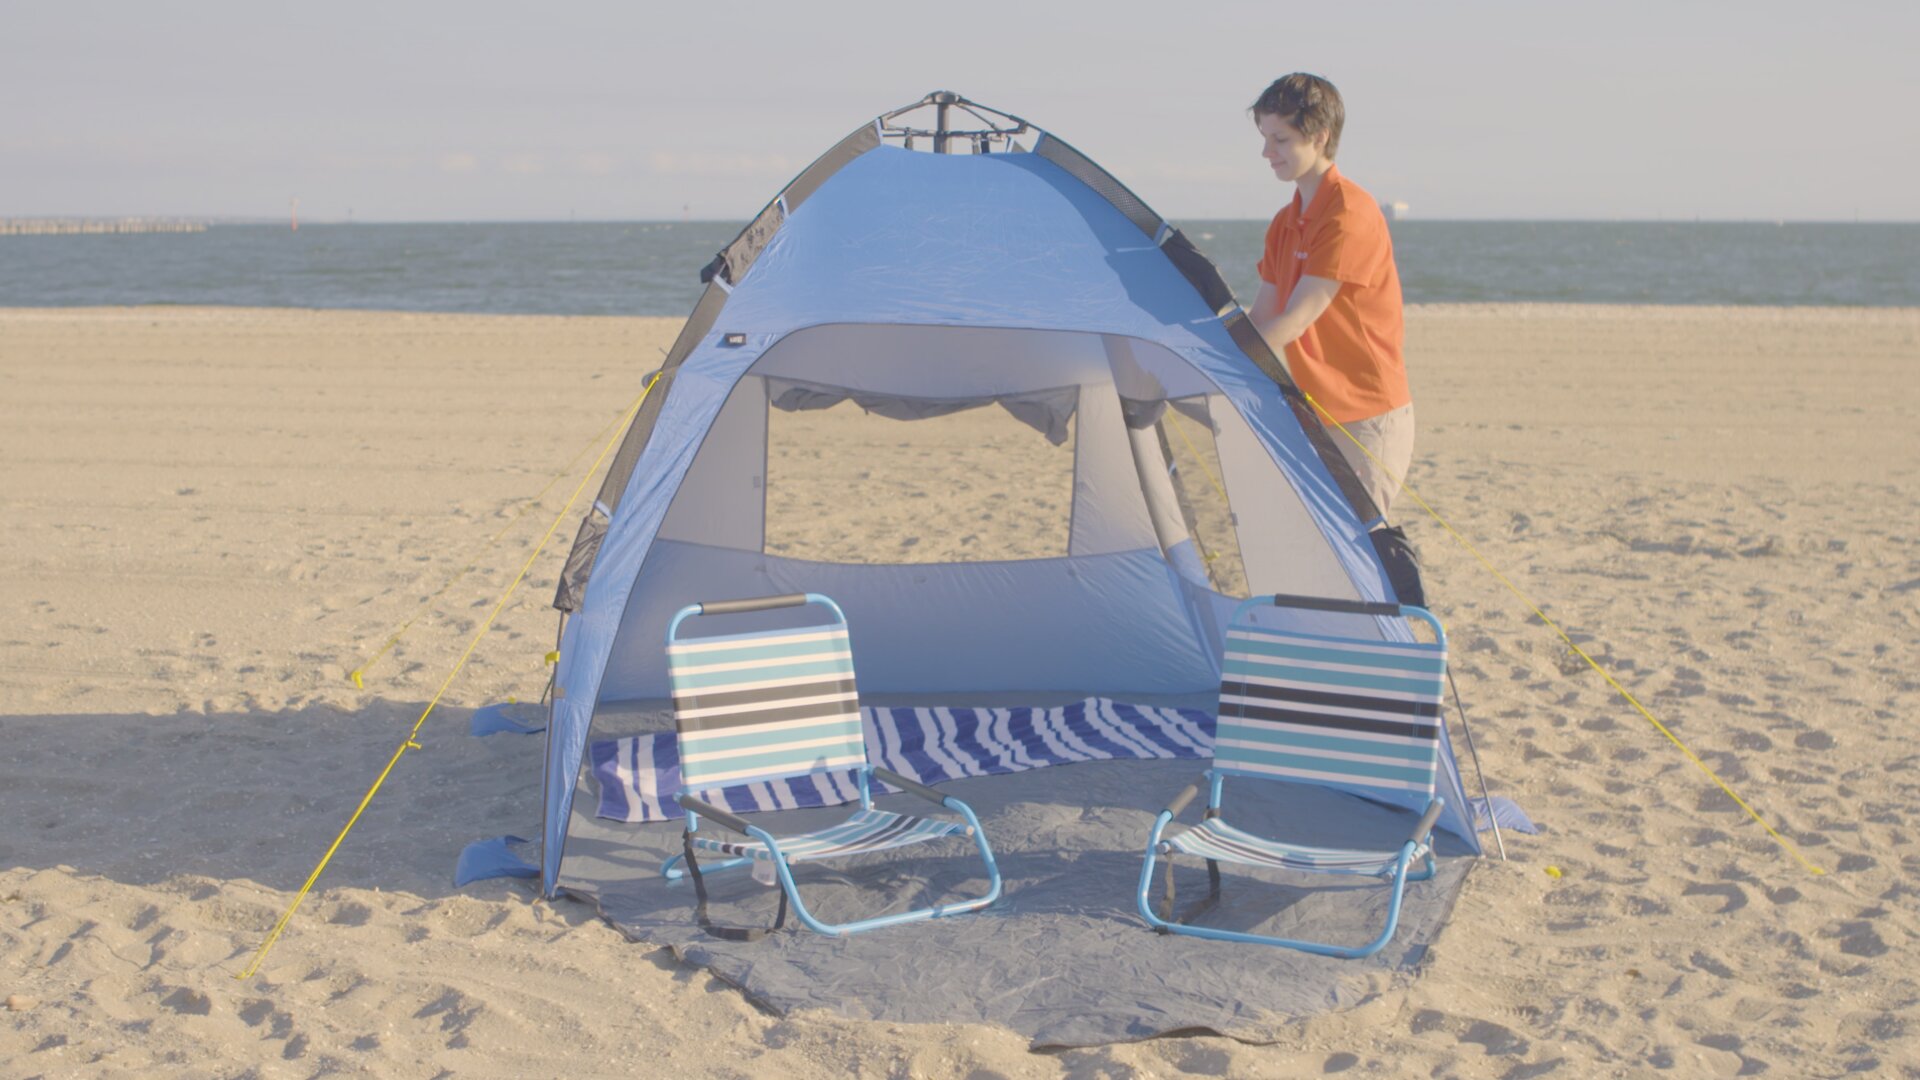 How To Choose A Beach Shelter & Storage - Beach Shelter